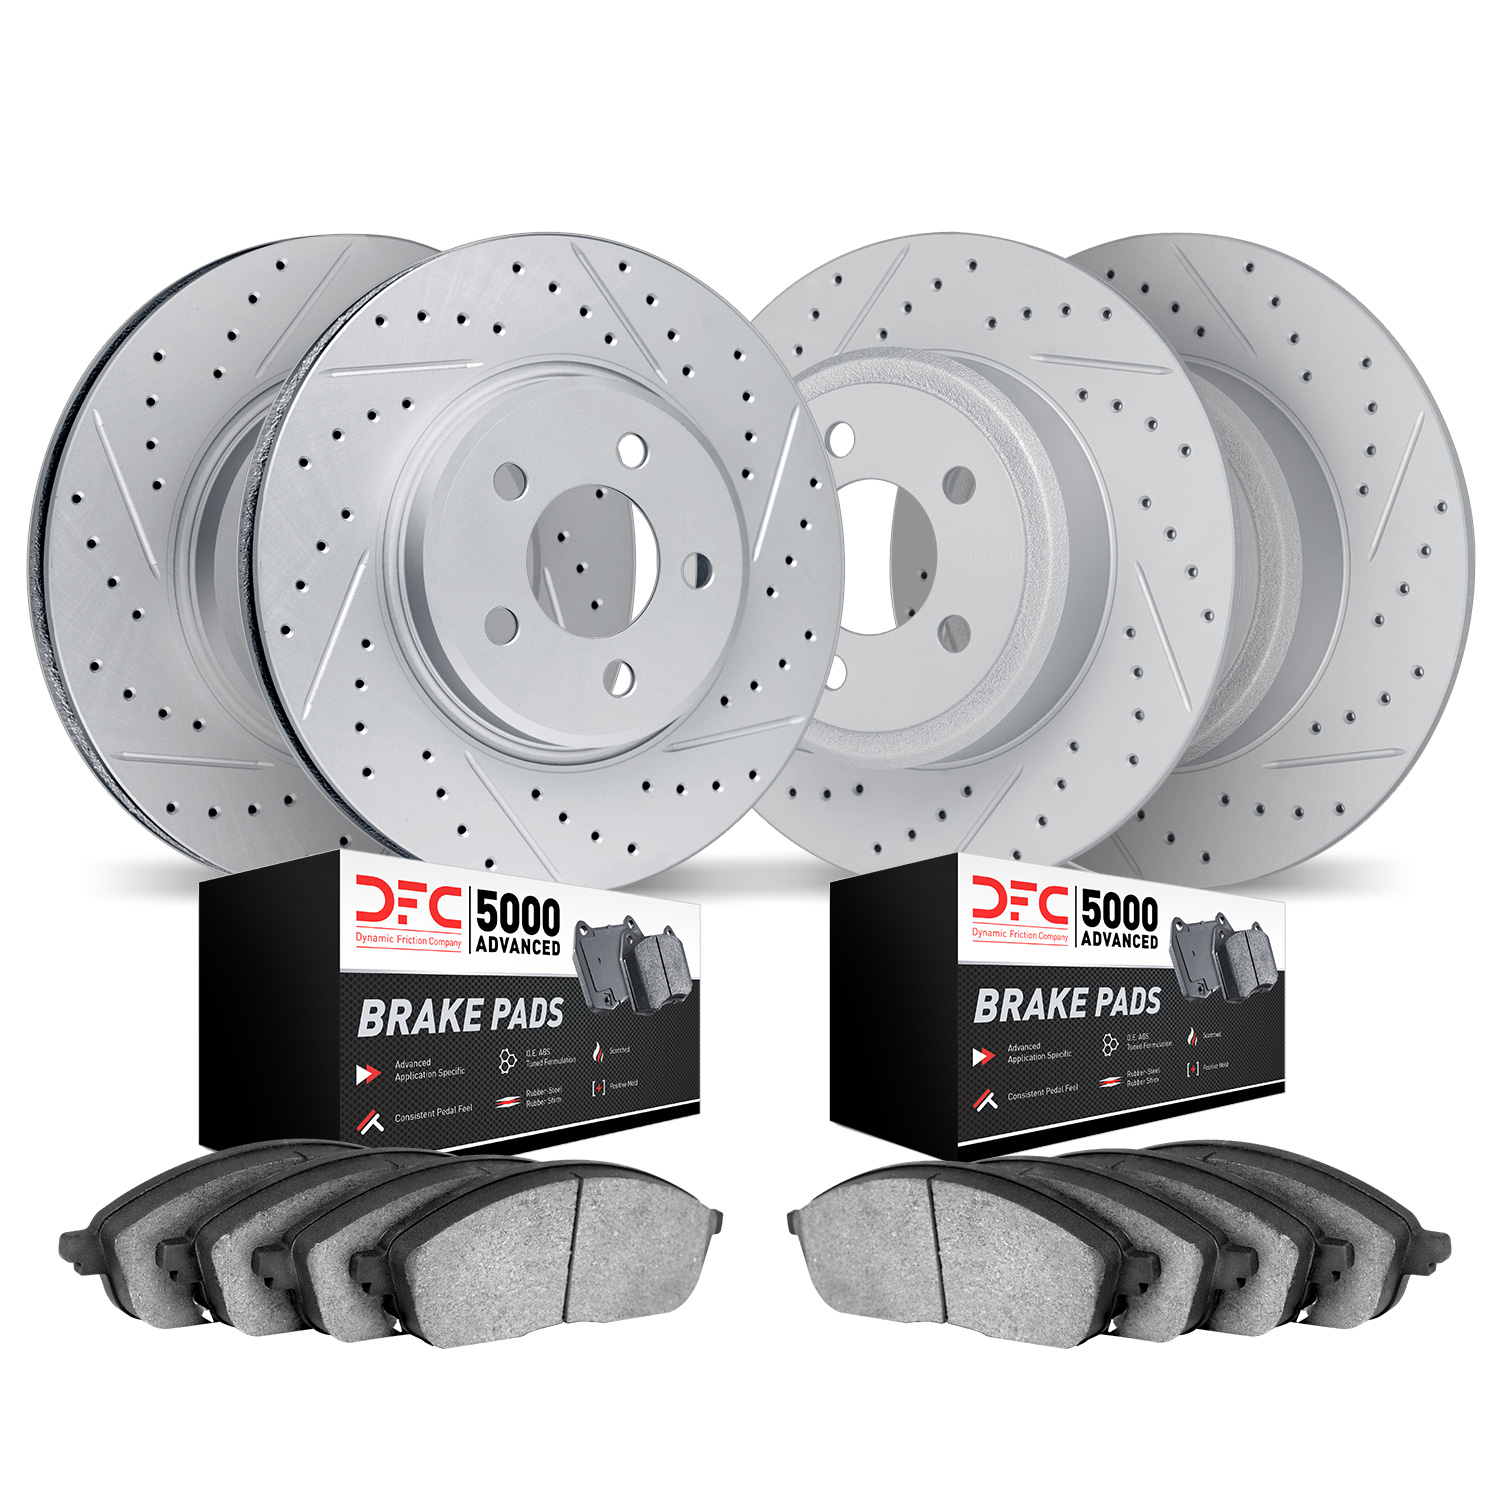 2504-40108 Geoperformance Drilled/Slotted Rotors w/5000 Advanced Brake Pads Kit, 2012-2020 Multiple Makes/Models, Position: Fron